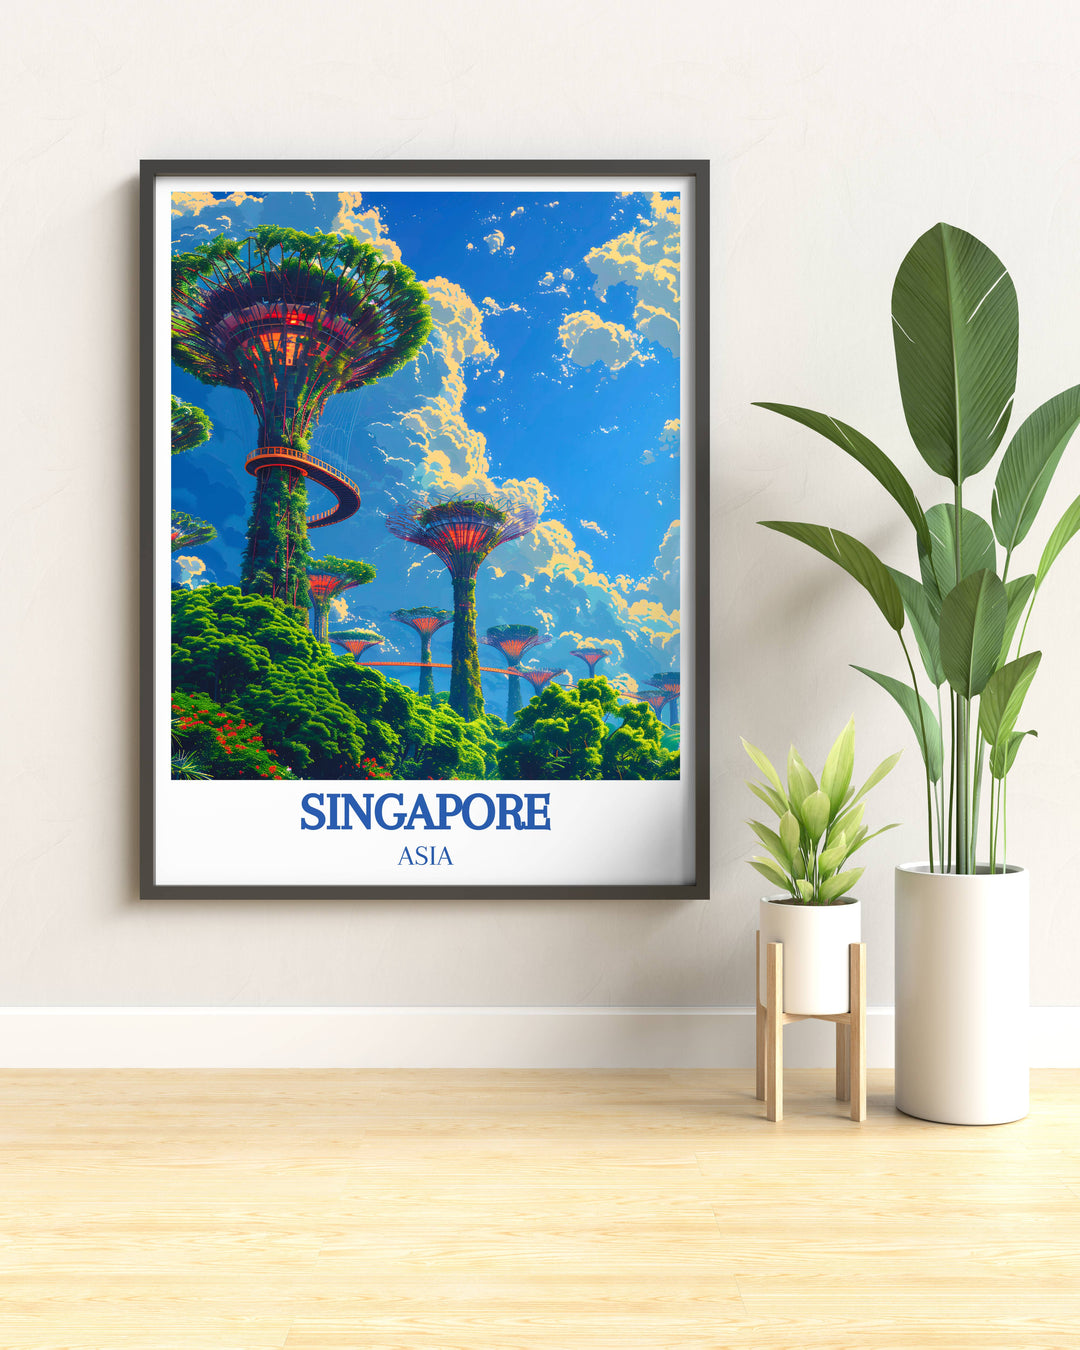 Celebrate the vibrant culture of Singapore with our Asia Canvas Art, highlighting the intricate details and vibrant colors of Gardens by the Bay.